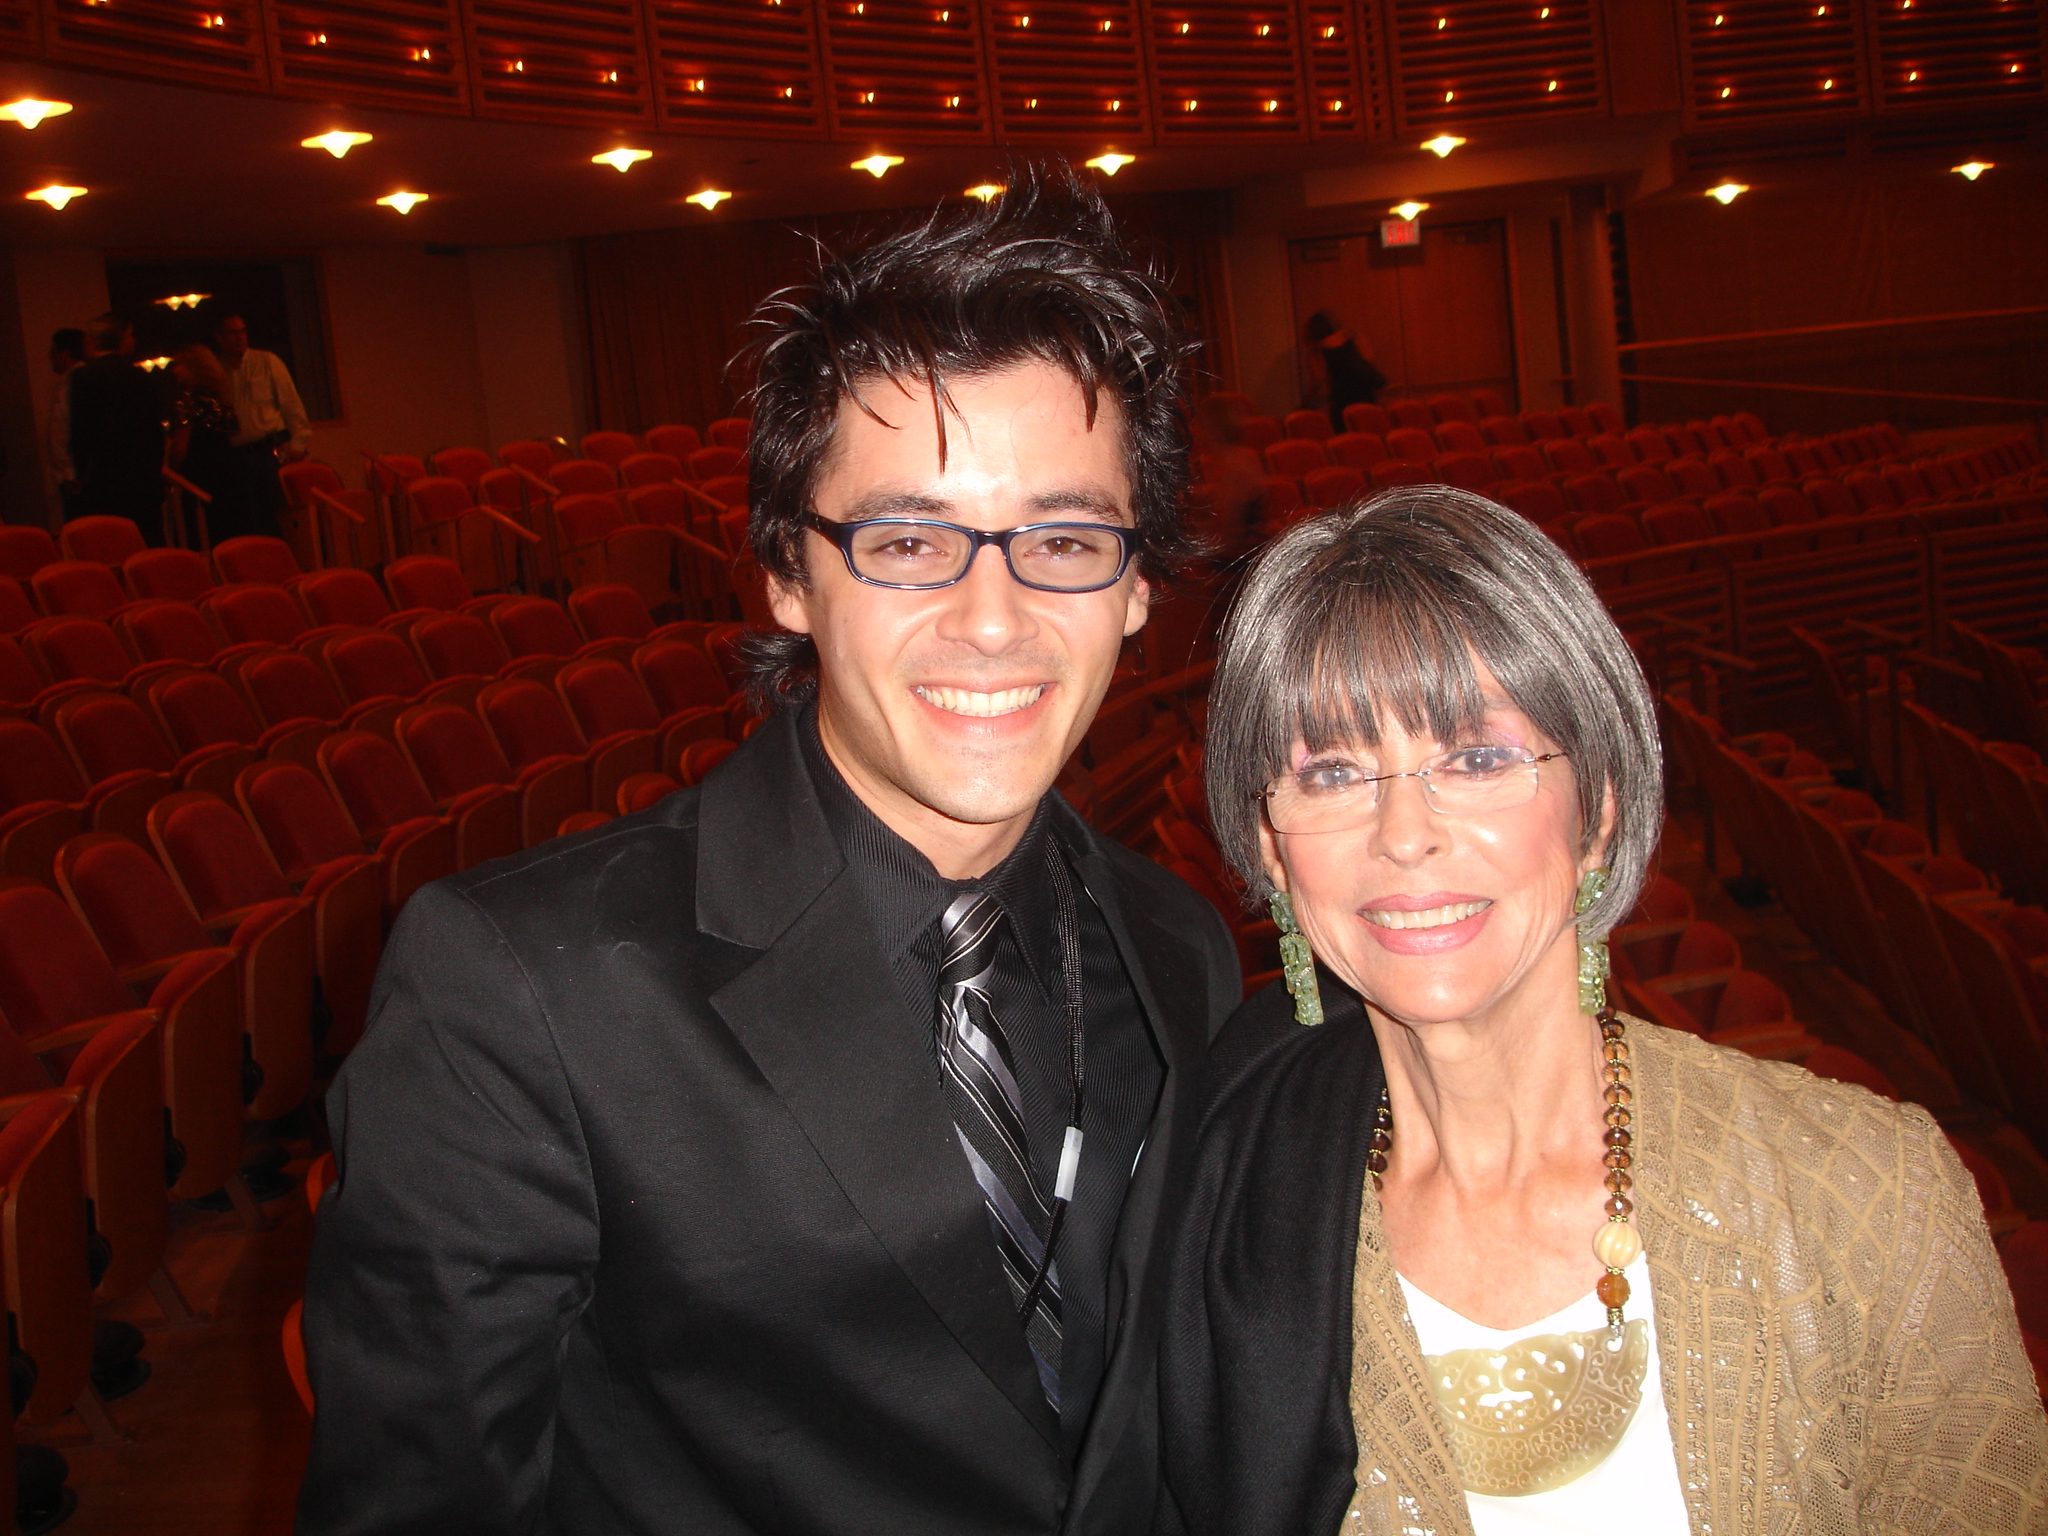 George Akram and Rita Moreno at the Opening of Adrienne Arsht Center for the Performing Arts